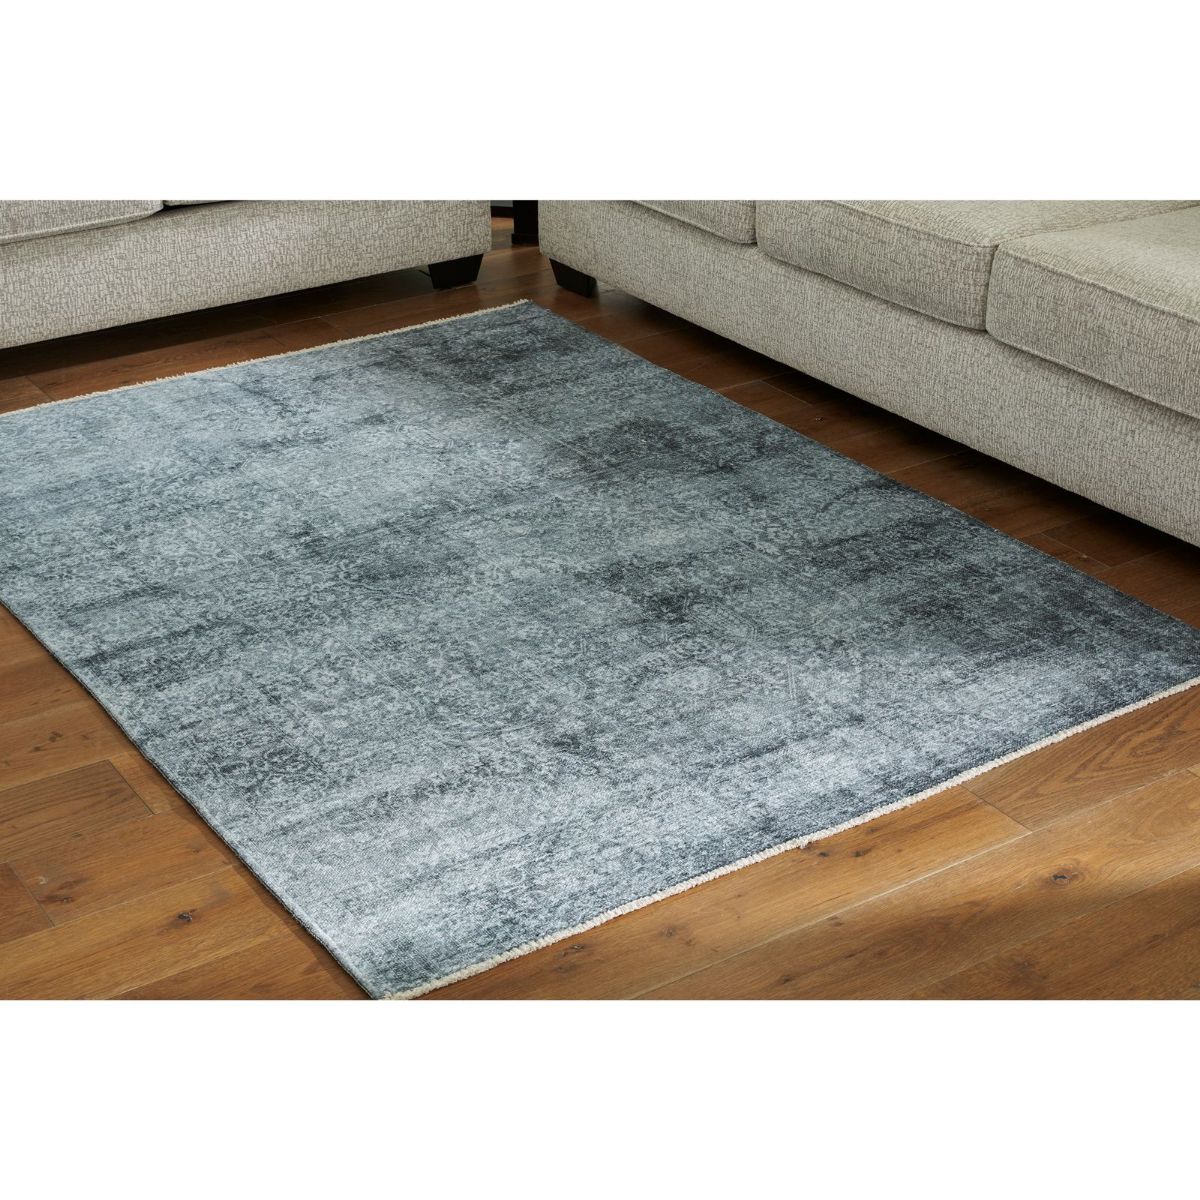 Picture of Rhysill Teal 5’ x 7’ Rug